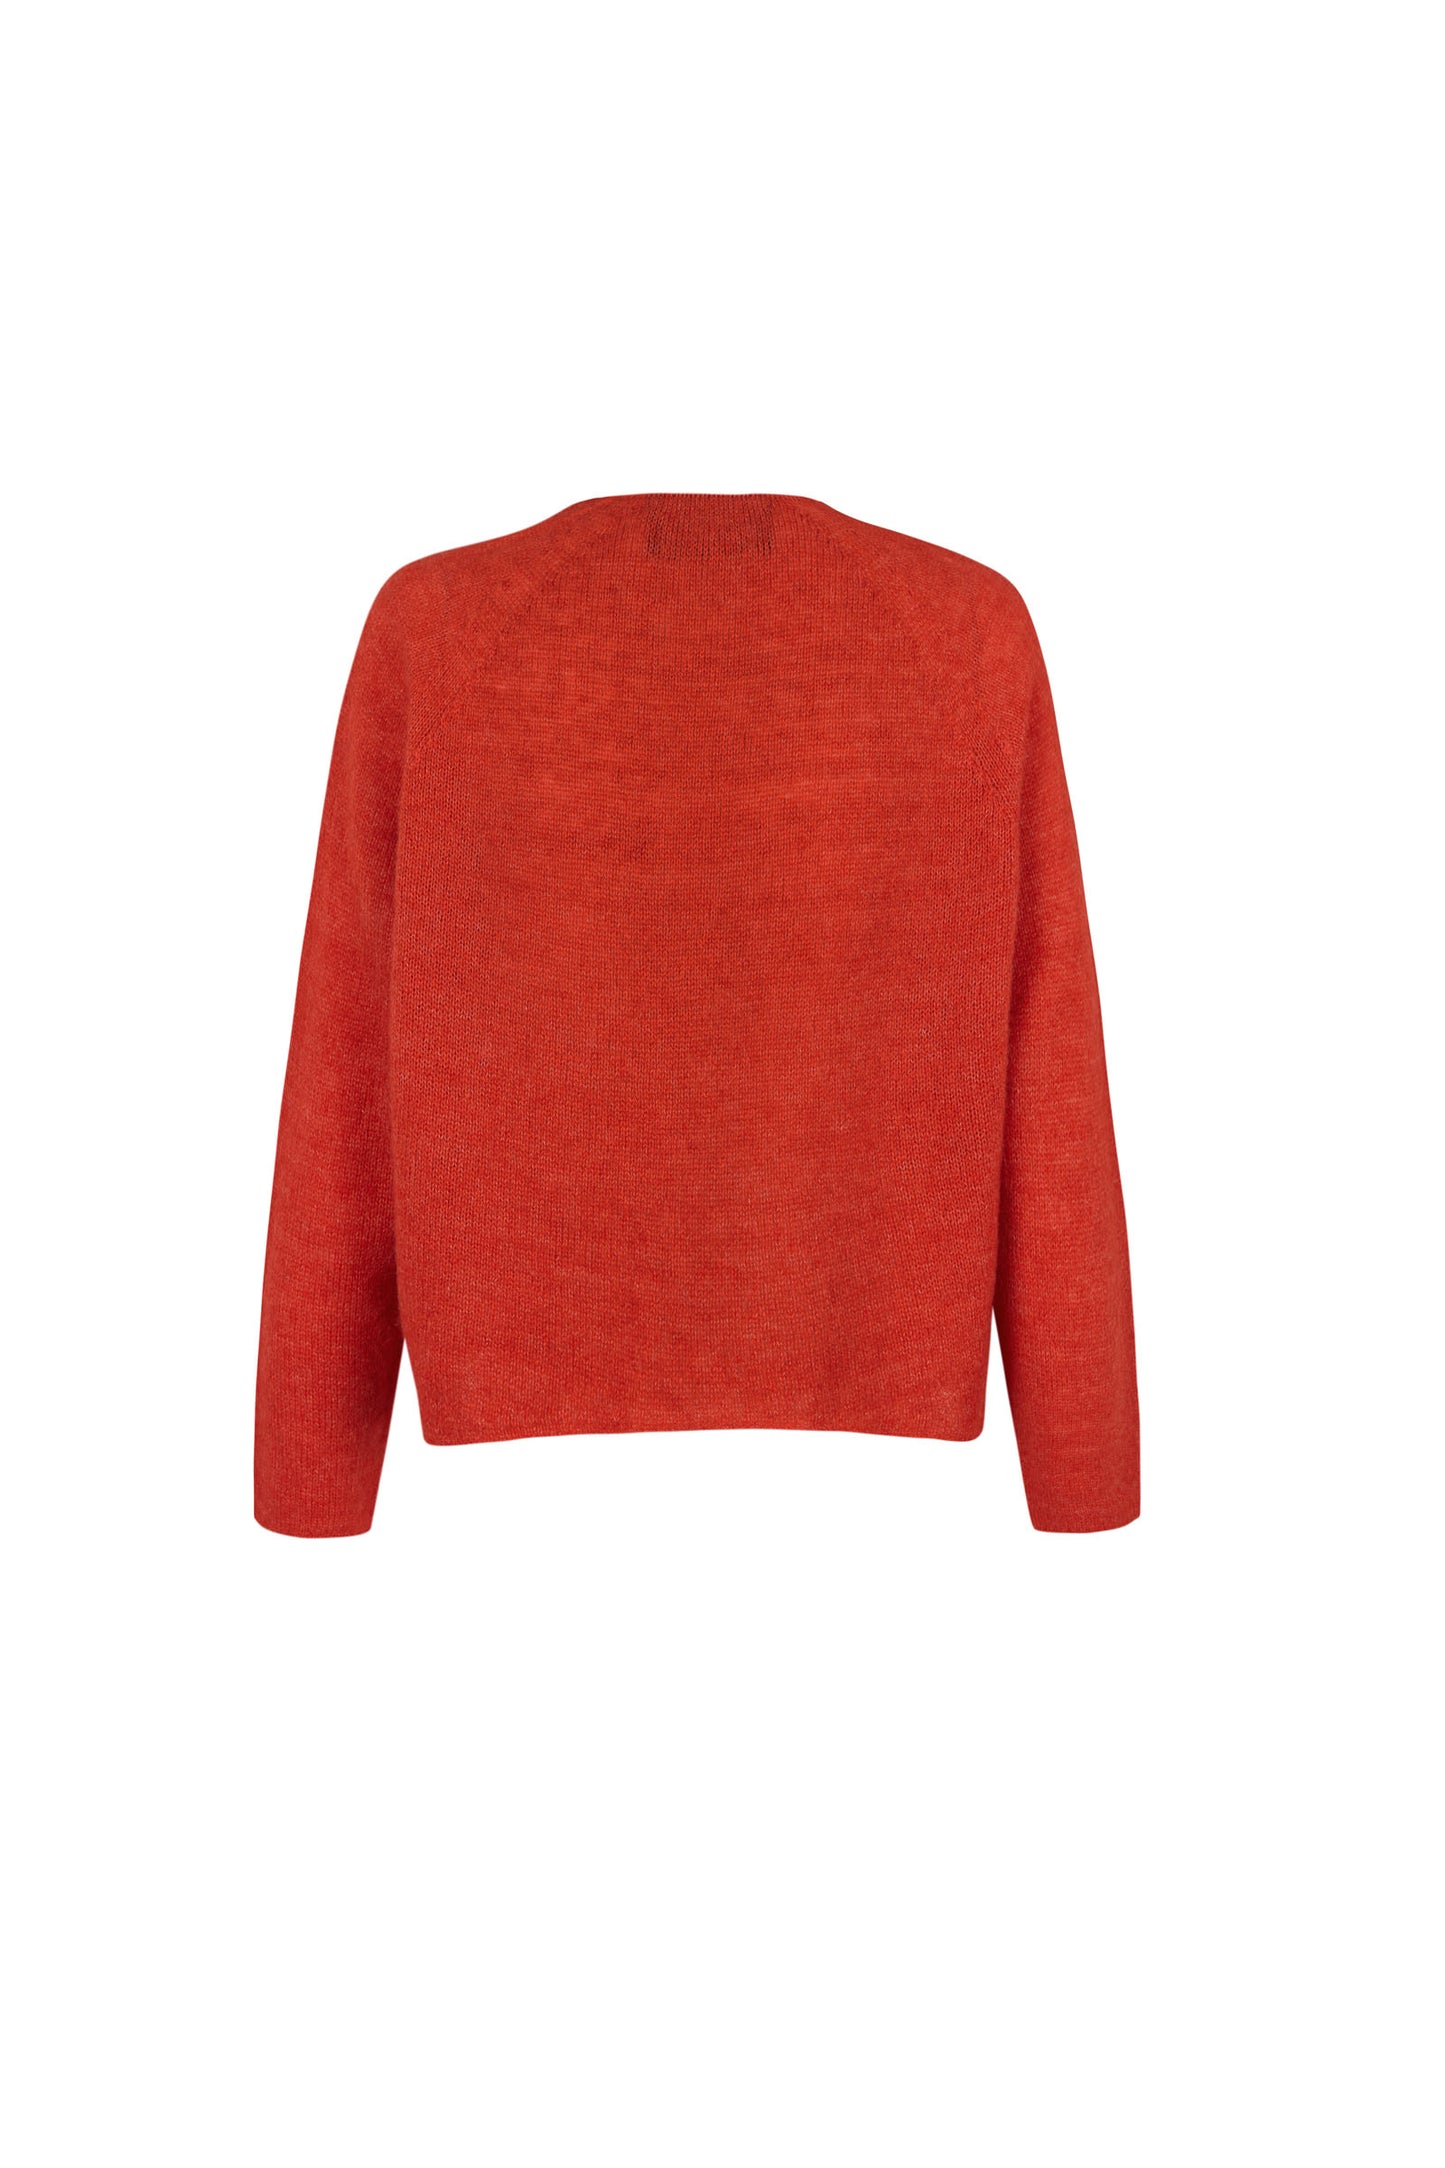 Mar, red knitted cardigan in alpaca, cashmere and silk